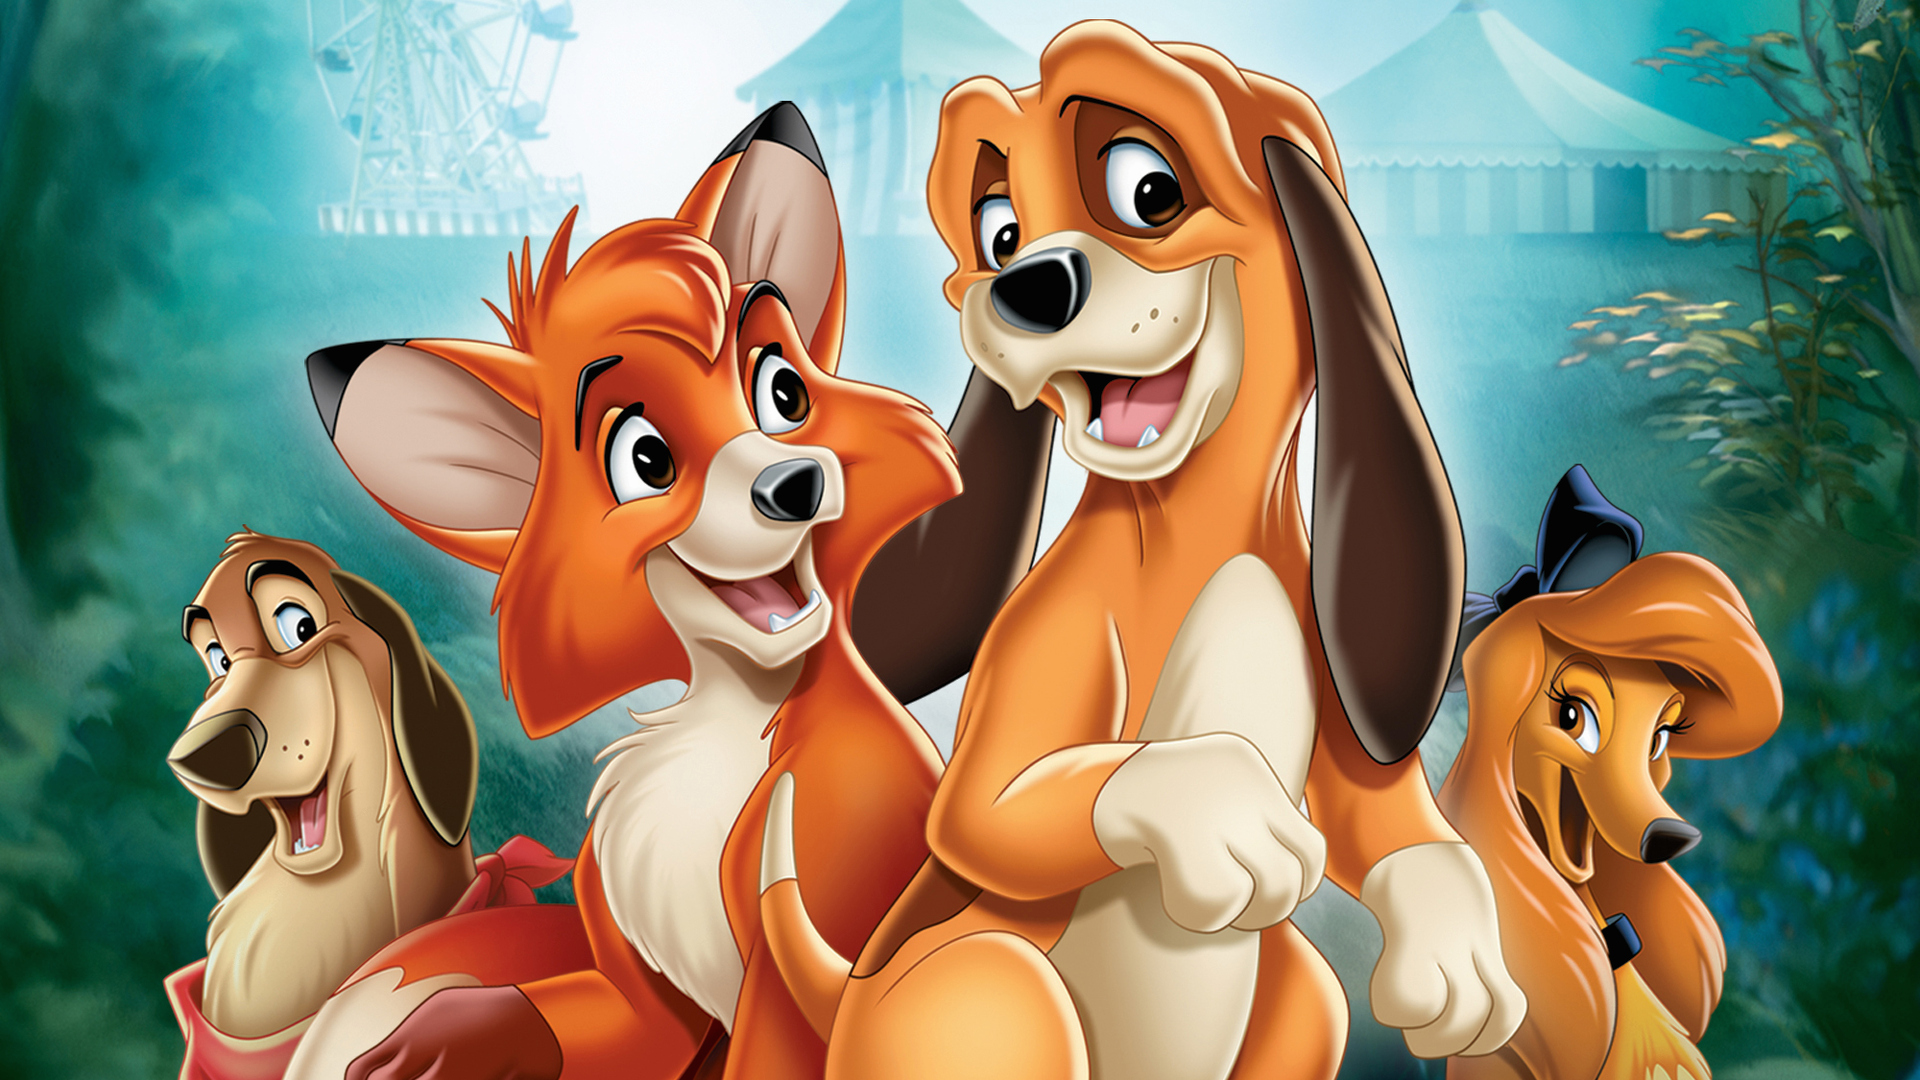 Movie The Fox and the Hound 2 HD Wallpaper Background Image. 